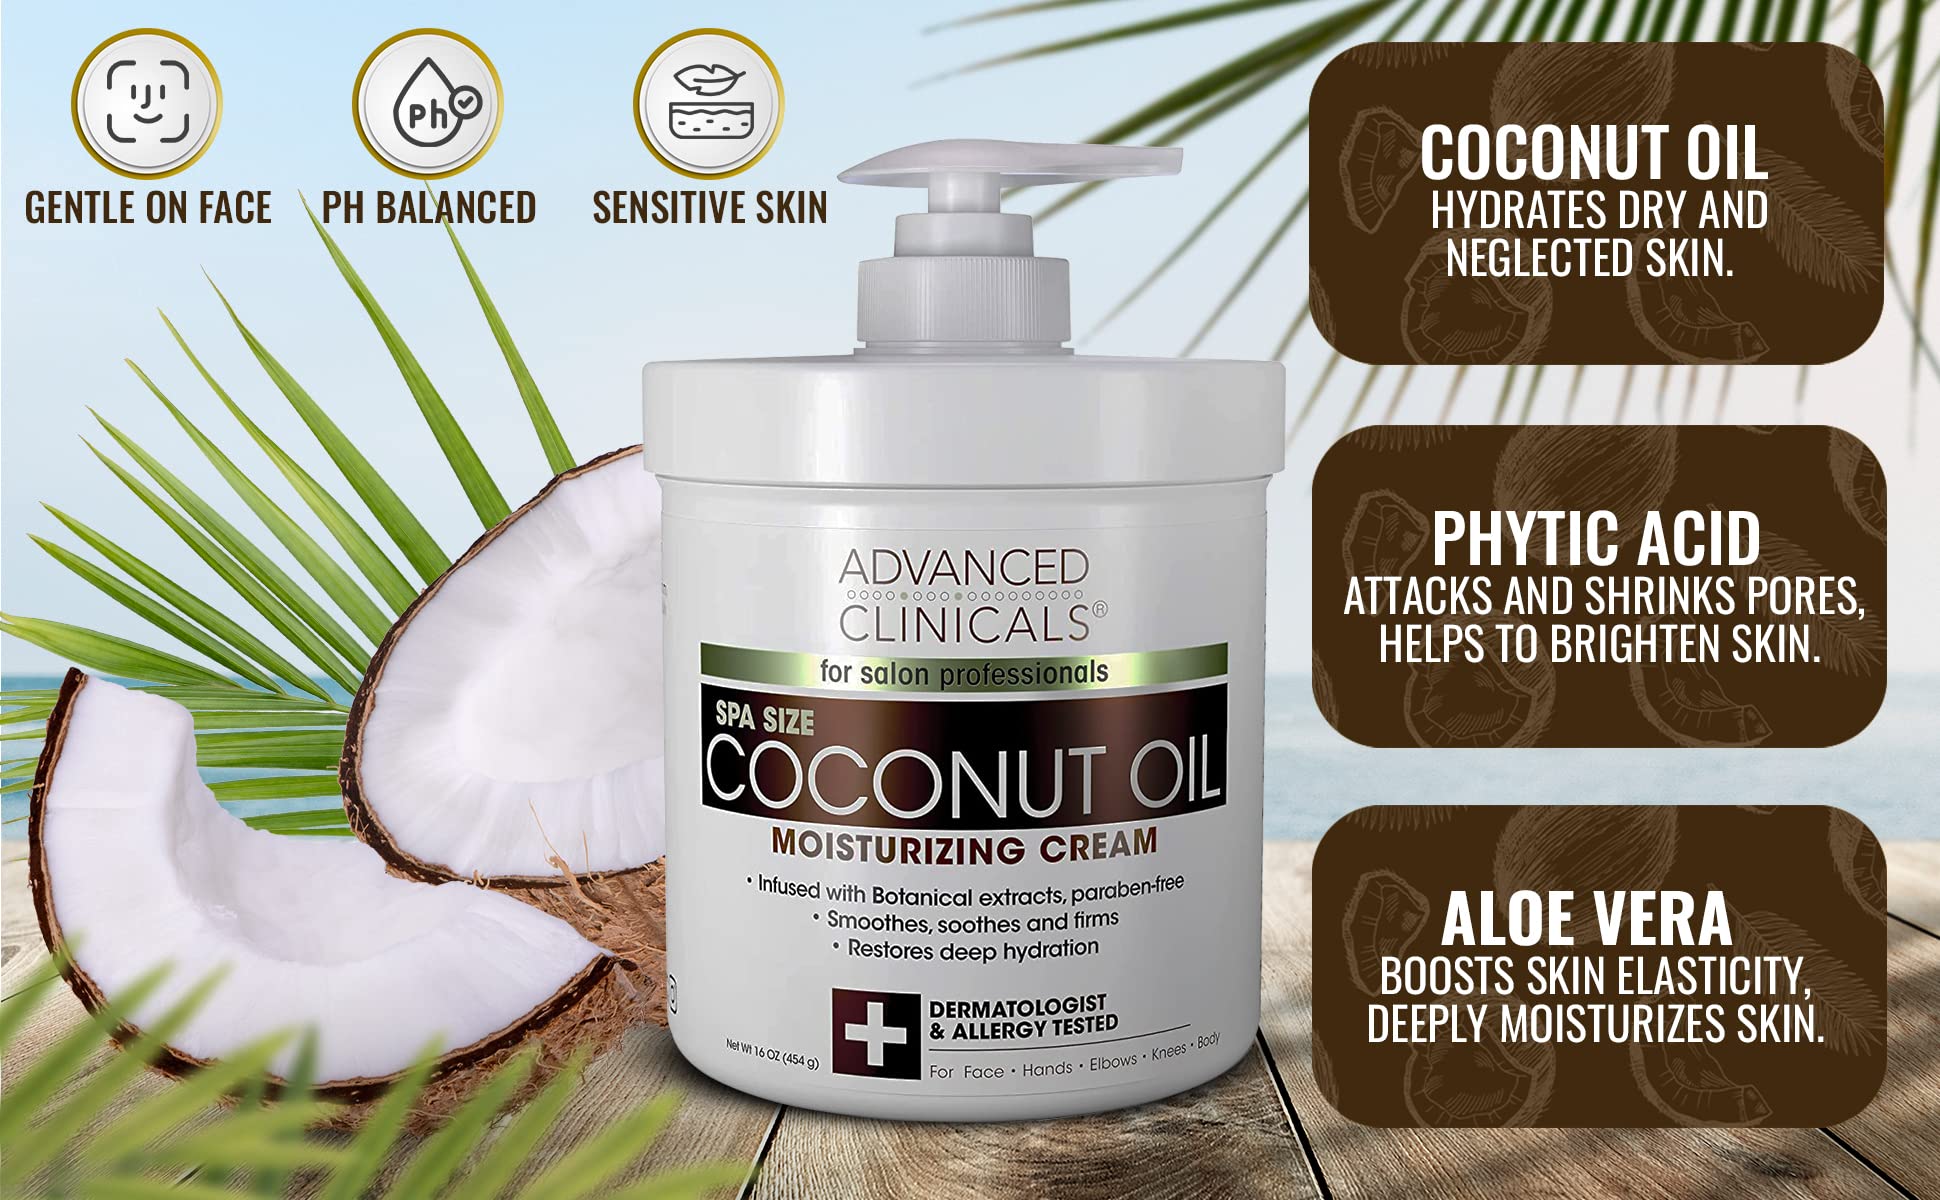 Advanced Clinicals Coconut Body Lotion Moisturizing Cream & Face Lotion | Coconut Oil Lotion For Women & Men | Natural Coconut Cream Moisturizer Body Butter Skin Care Balm For Dry Skin, Large 16 Oz